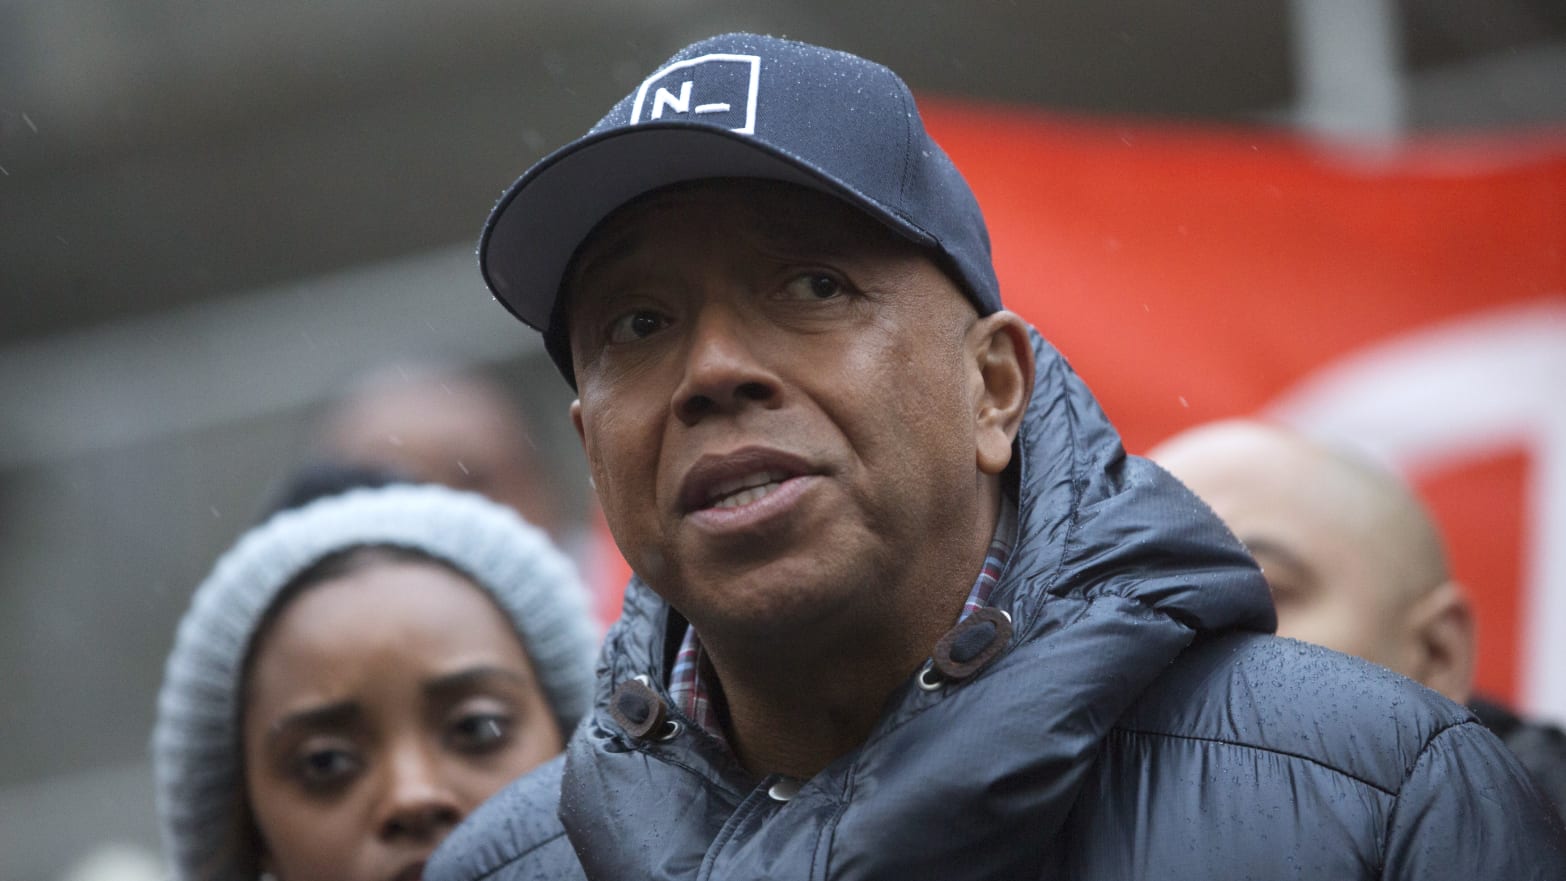 Russell Simmons, wearing a hat, prepares to speak at an outside event.